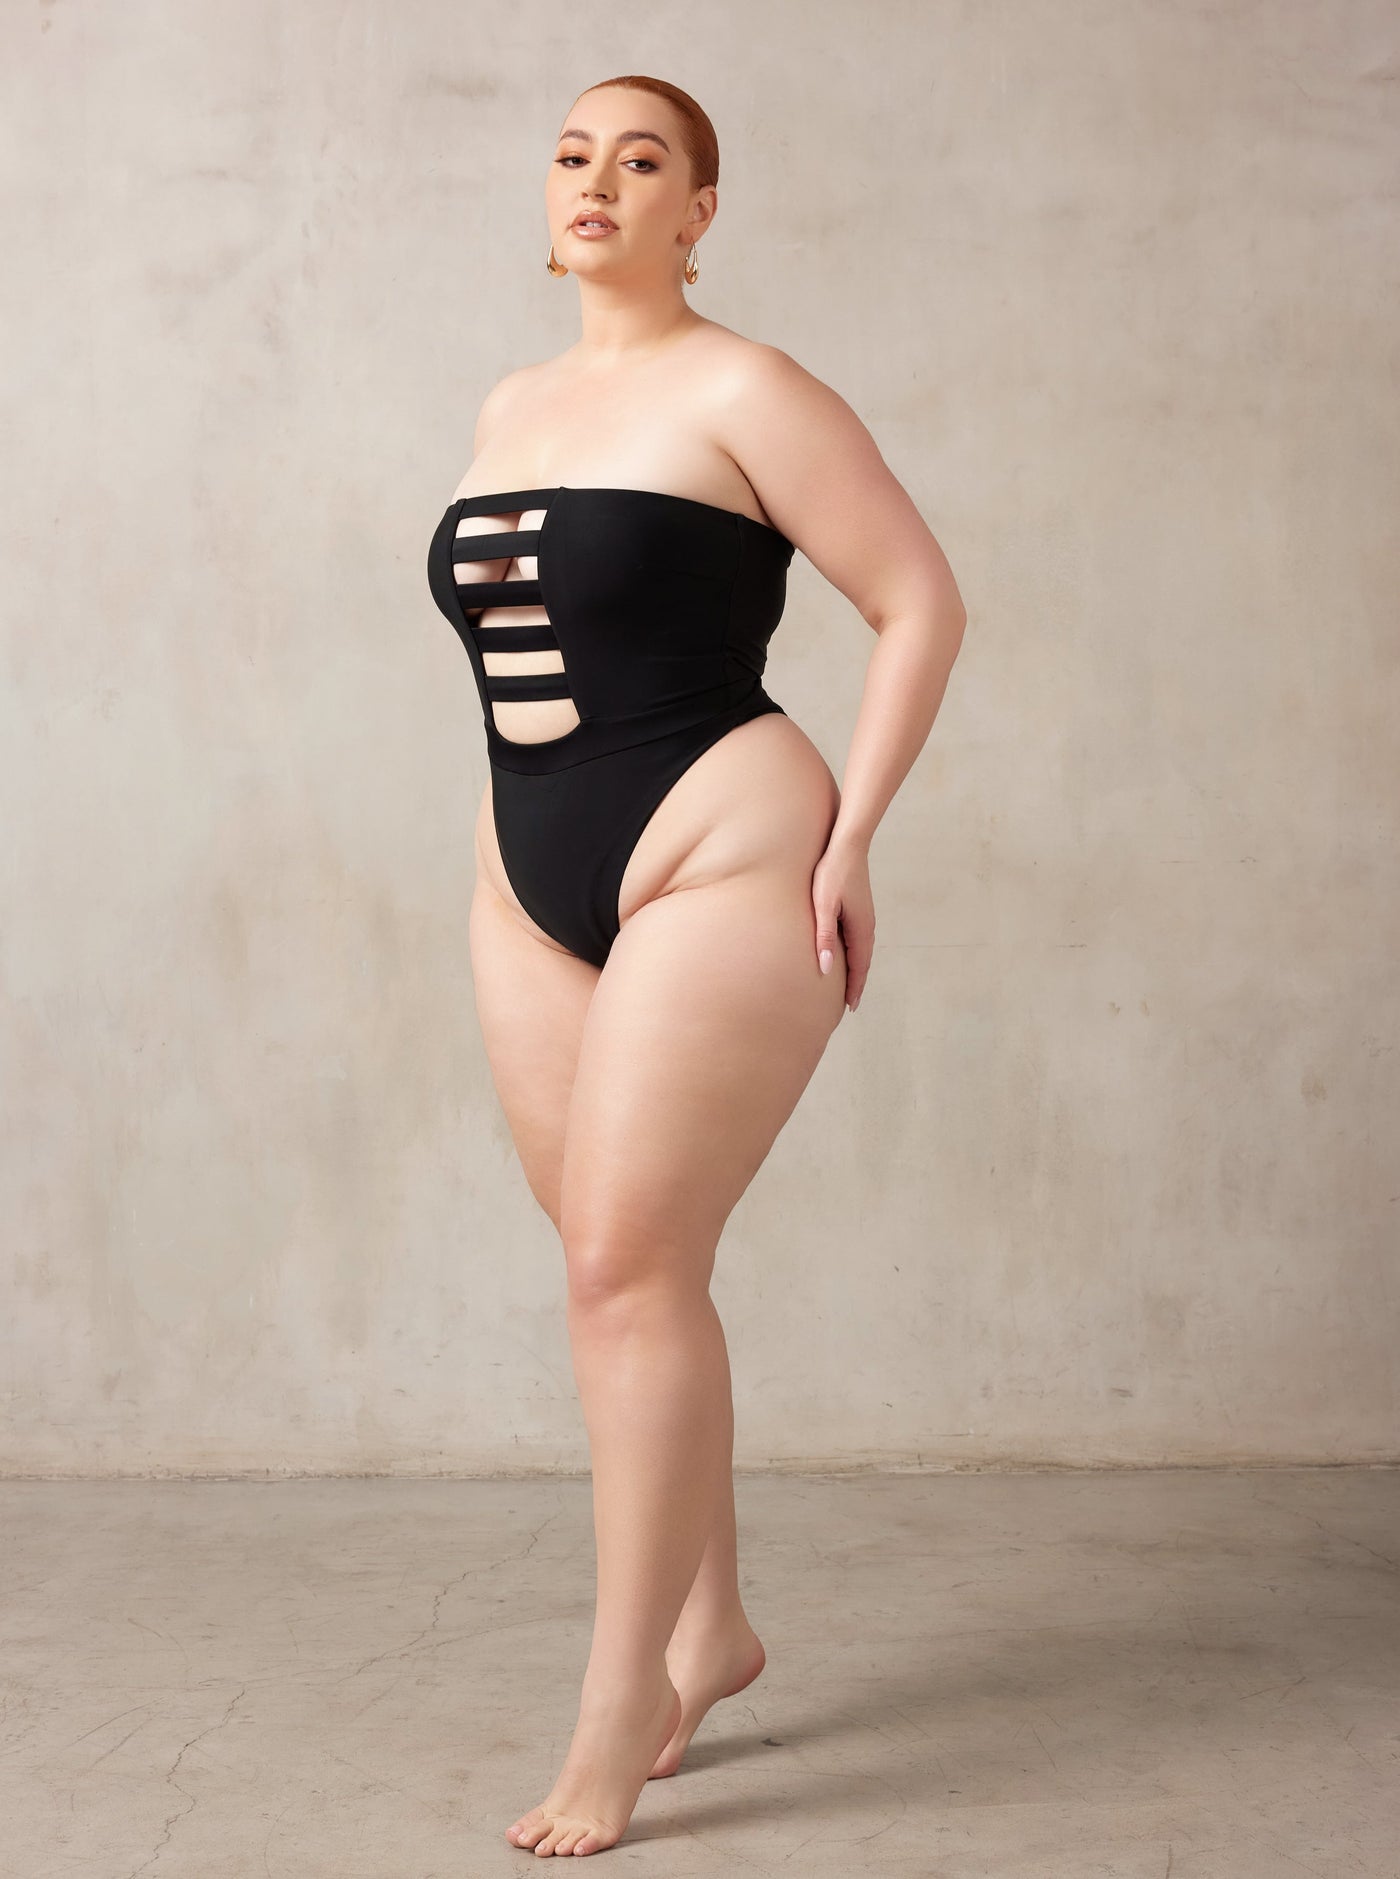 MBM Swim, Marcia B Maxwell high-cut Black cut-out one-piece swimsuit on beautiful midsize curve model, black owned #color_black